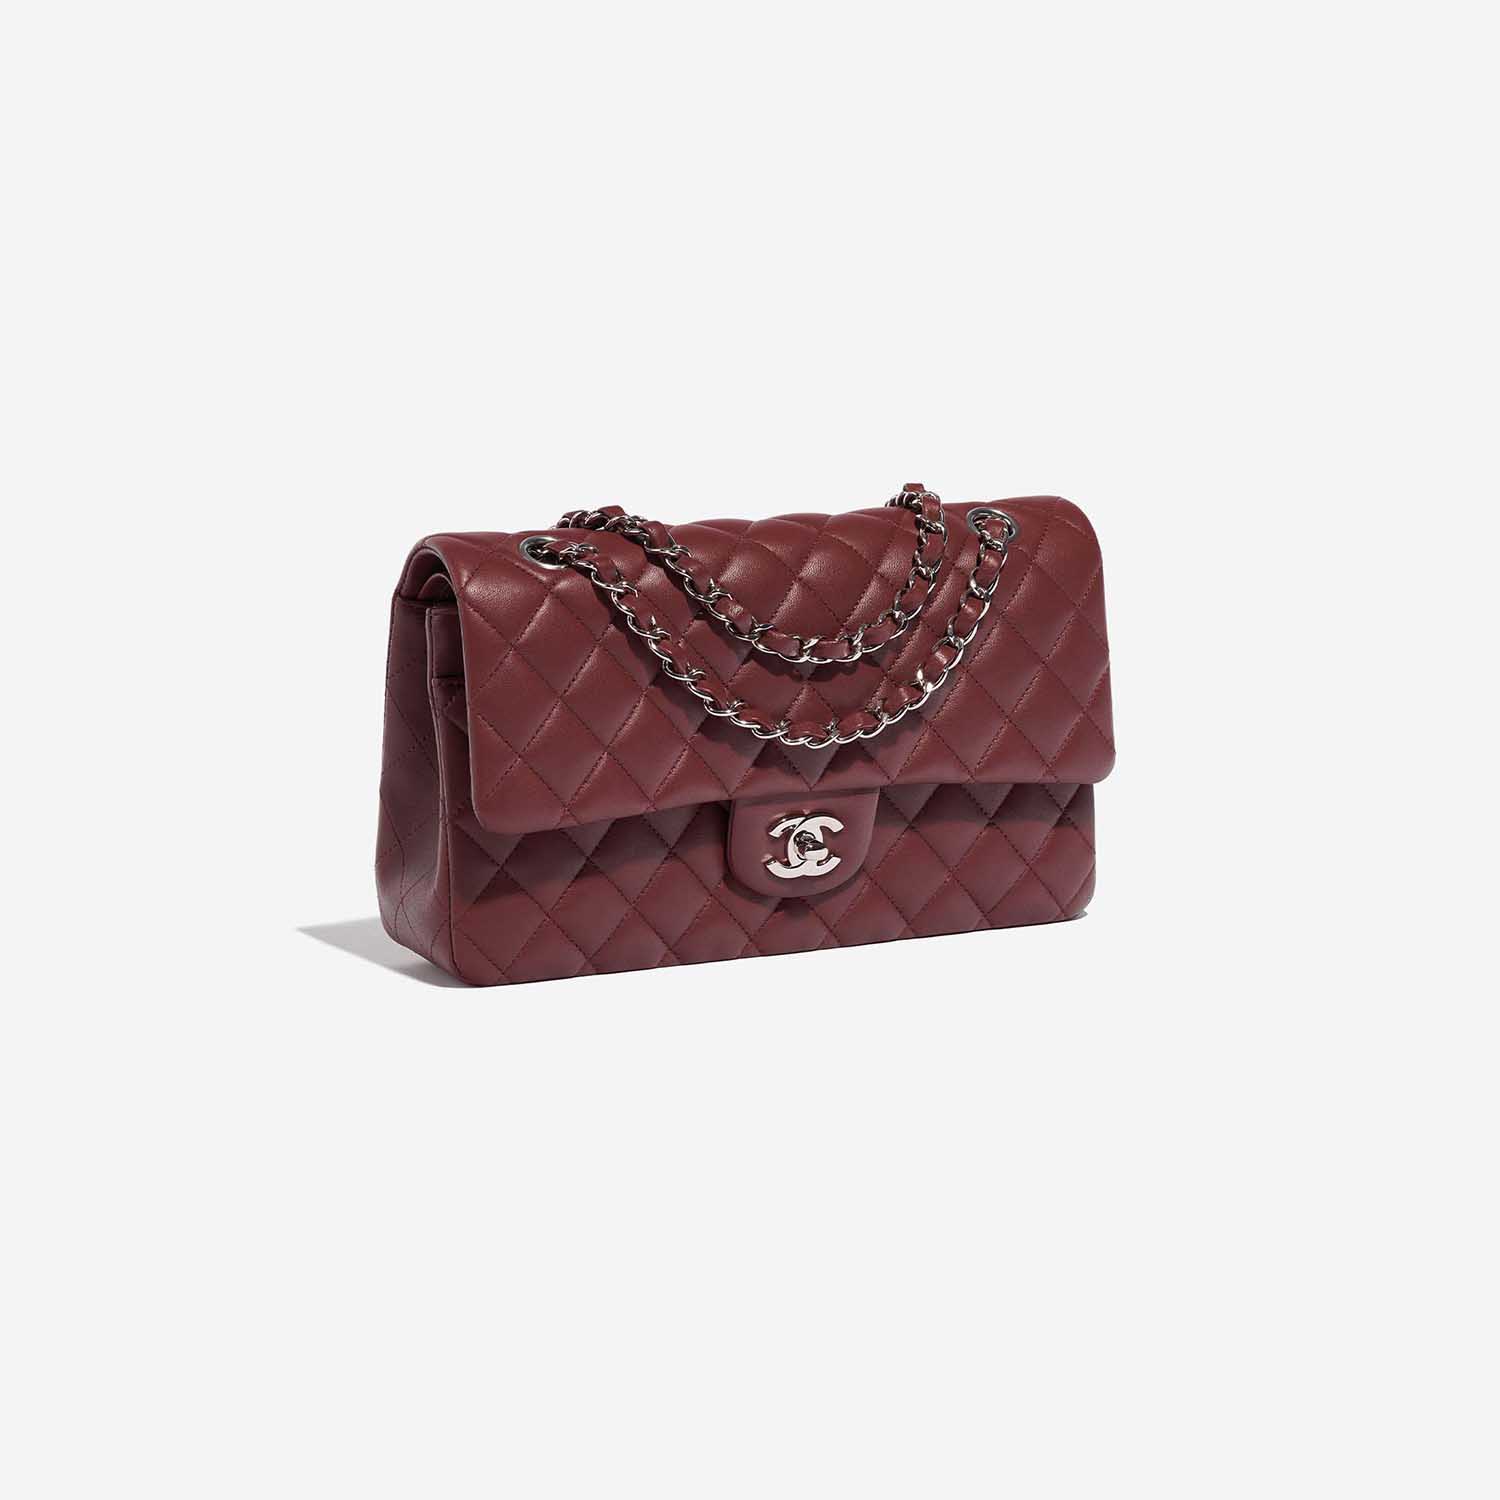 Chanel 2020 20S Mini Square Flap Shoulder Bag Red Quilted Leather